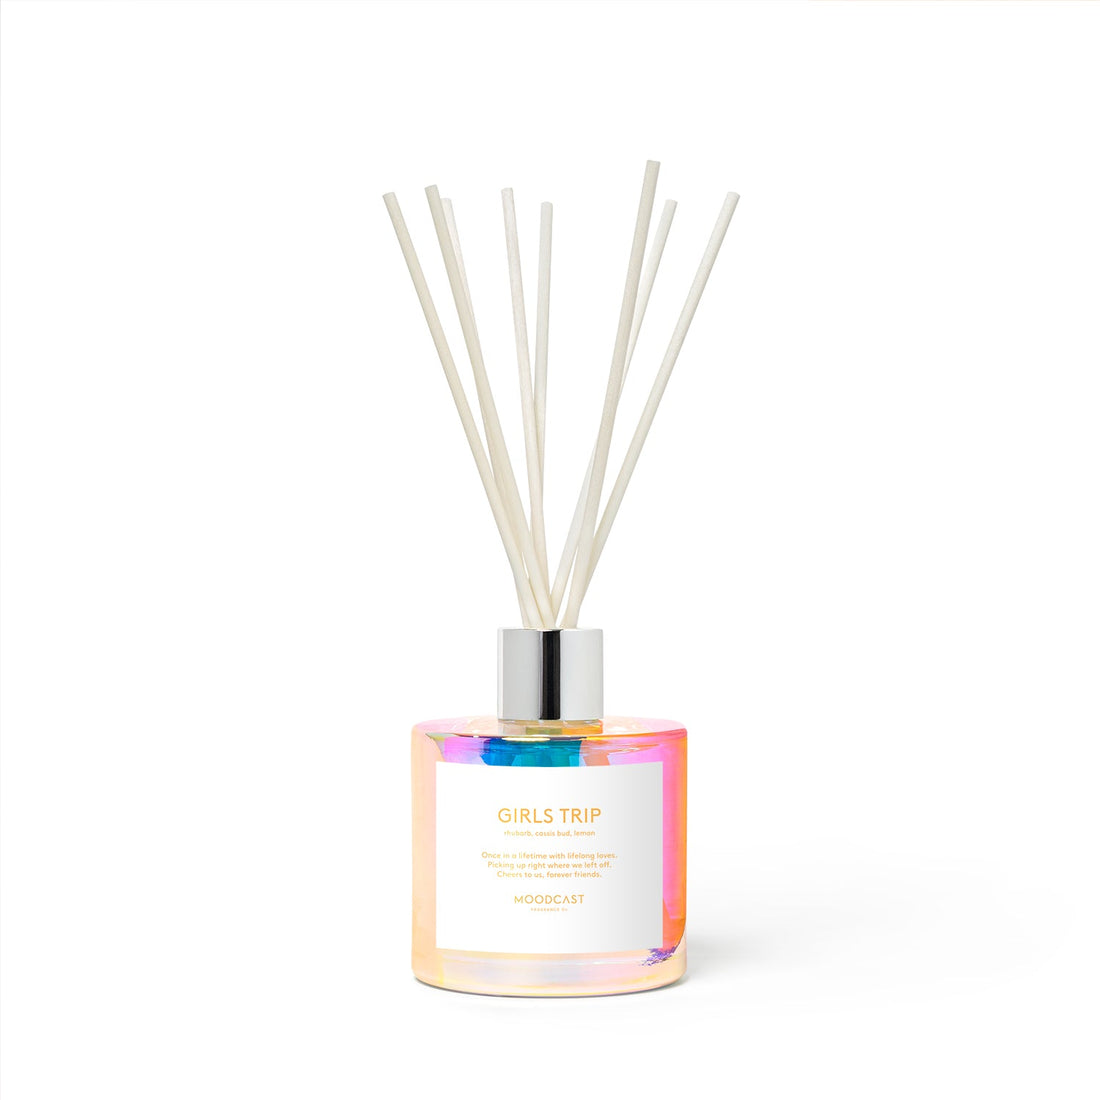 Girls Trip - Vibes Collection (Iridescent) - 3.4fl oz/100ml Glass Reed Diffuser - Key Notes: Rhubarb, Cassis Bud, Lemon